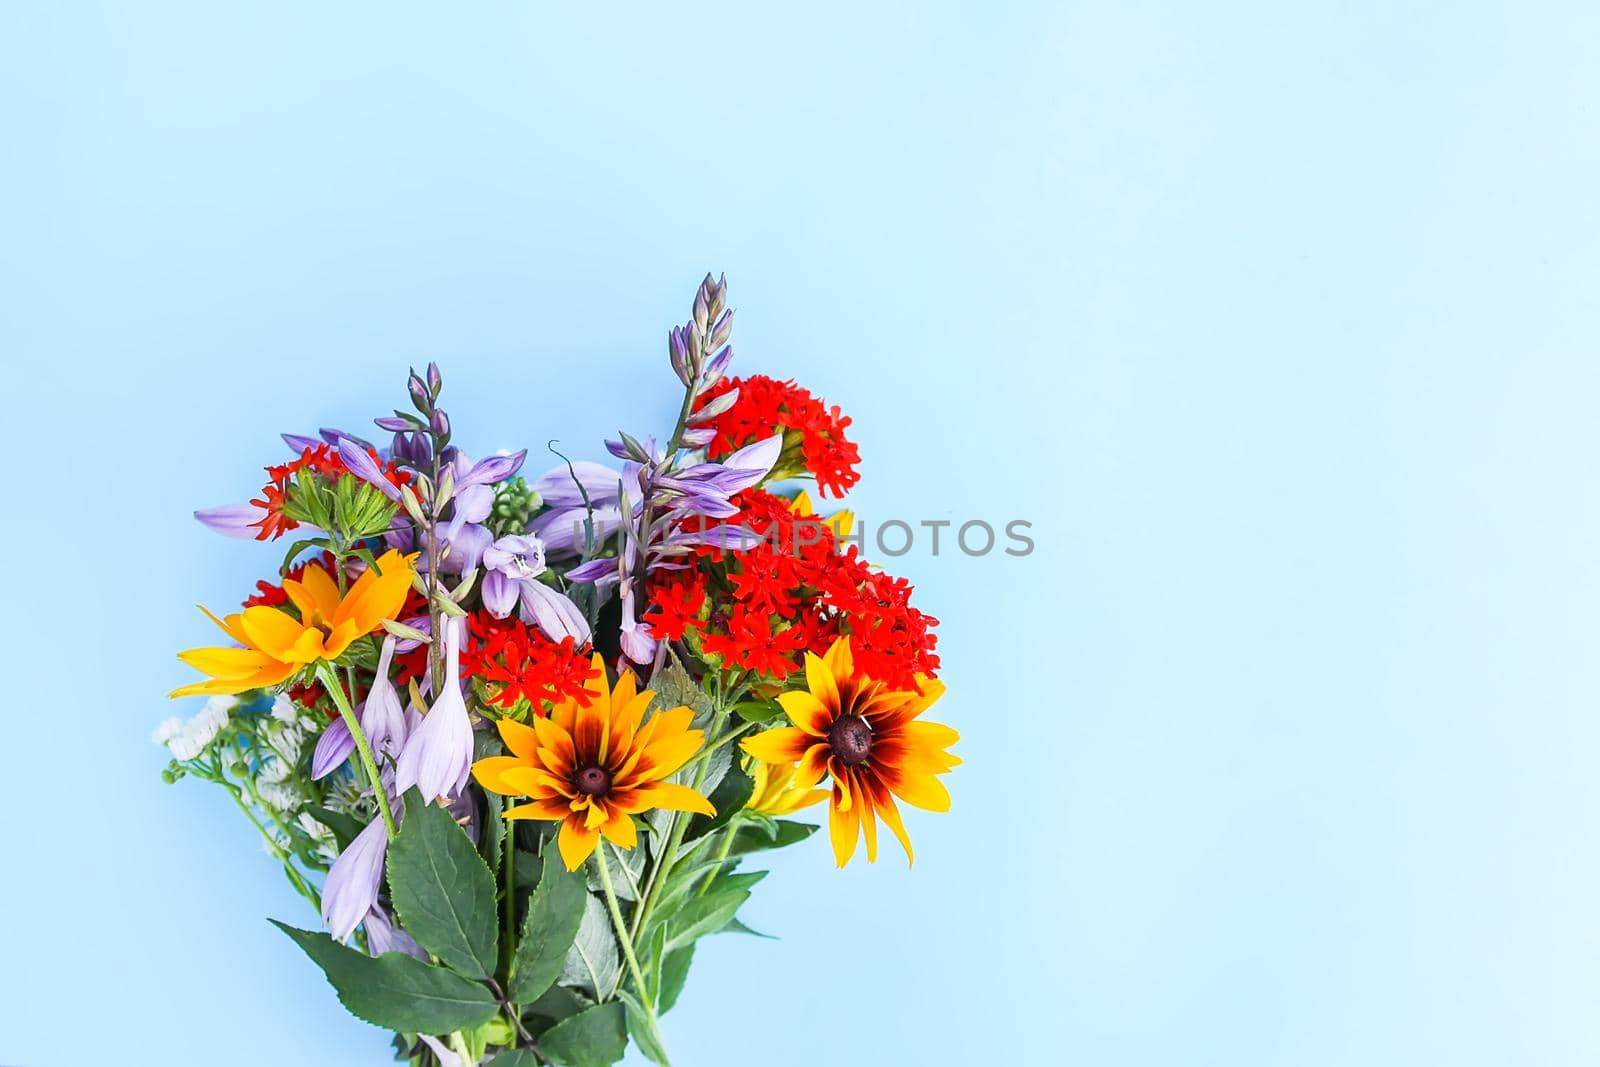 Small bouquet of garden flowers on light blue background. Purple decorative campanula, lychnis and rudbeckia or black-eyed susan plants. Festive floral template. Greeting card design. Top view.